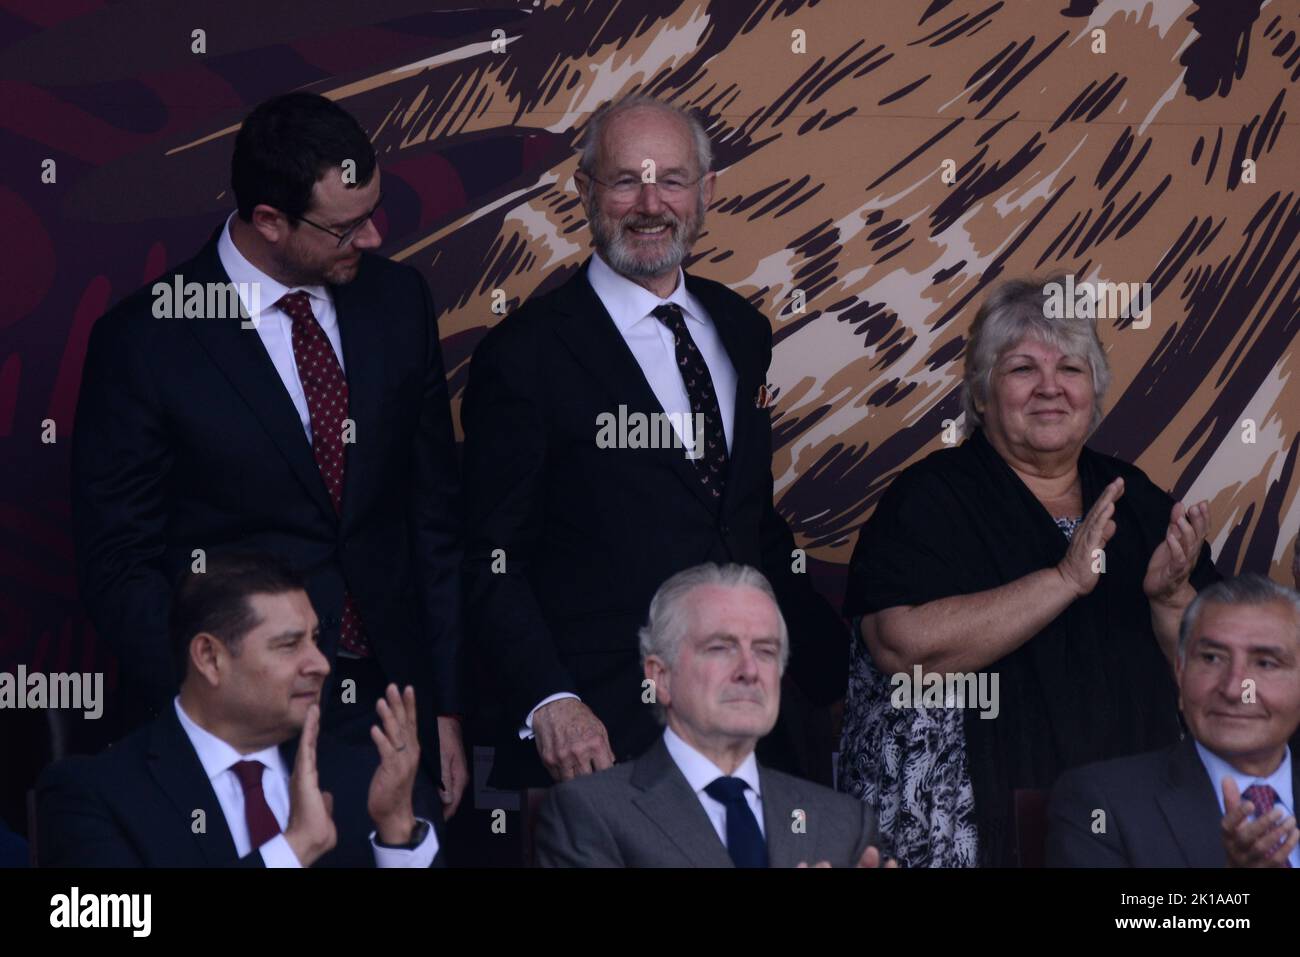 Mexico City, Mexico. 16th Sep, 2022. John Shipton father of Julian Assange, Gabriel Shipton brother of Julian Assange and Aleida Guevara March, daughter of Ernesto ''Che'' Guevara during the ceremony of the civic-military parade as part of the commemoration of the 212th Anniversary of the beginning of Mexico's Independence in the downtown. on September 16, 2022 in Mexico City, Mexico. Credit: ZUMA Press, Inc./Alamy Live News Stock Photo